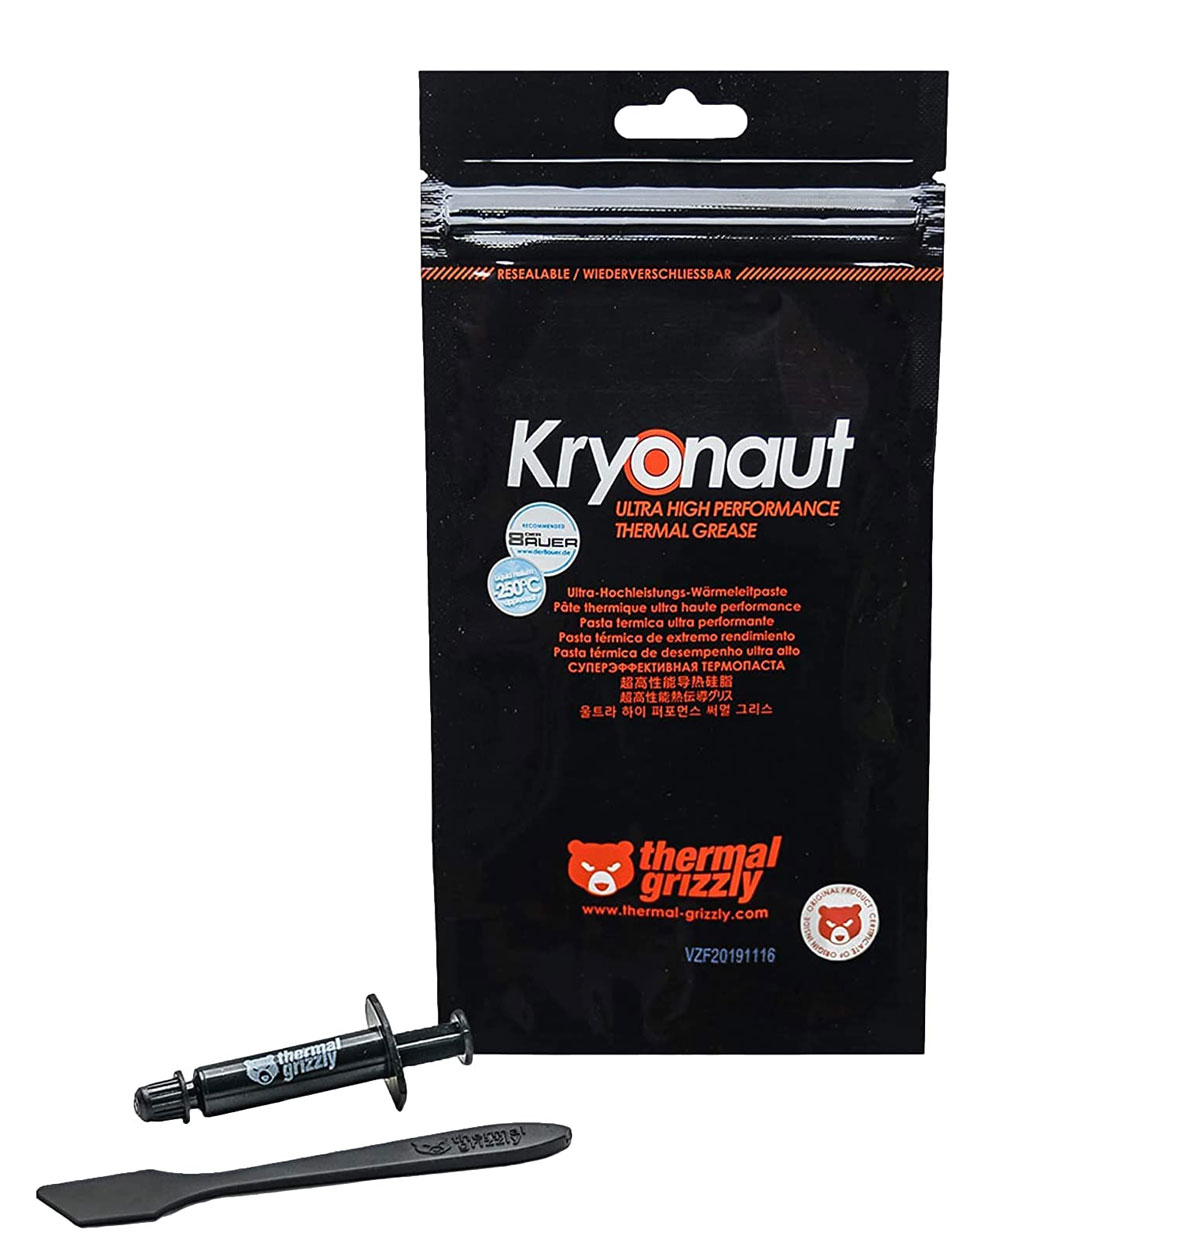 Thermal-Grizzly-Kryonaut-The-High-Performance-Thermal-Paste-1200px-v3.jpg